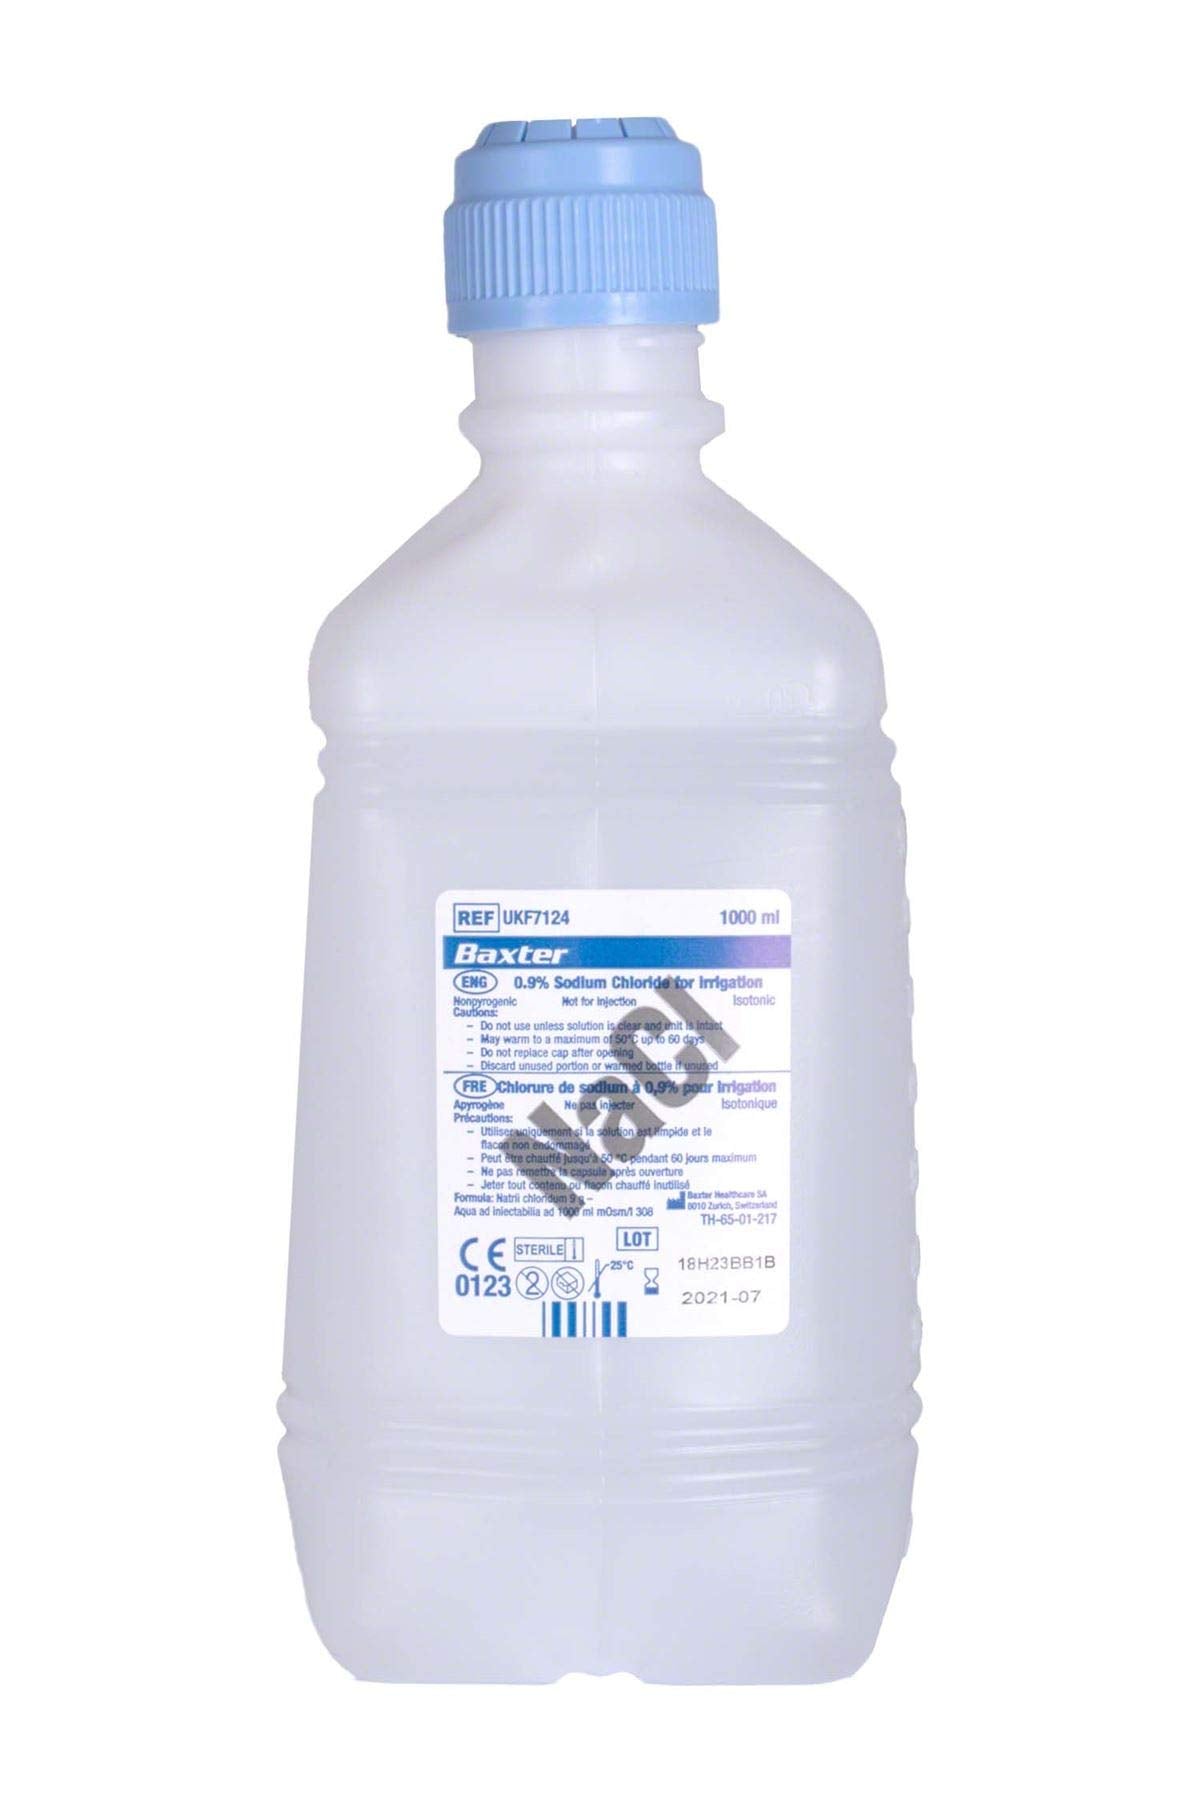 Baxter NaCl 0.9% Sodium Chloride (Saline) For Irrigation. One Litre (1000ml).